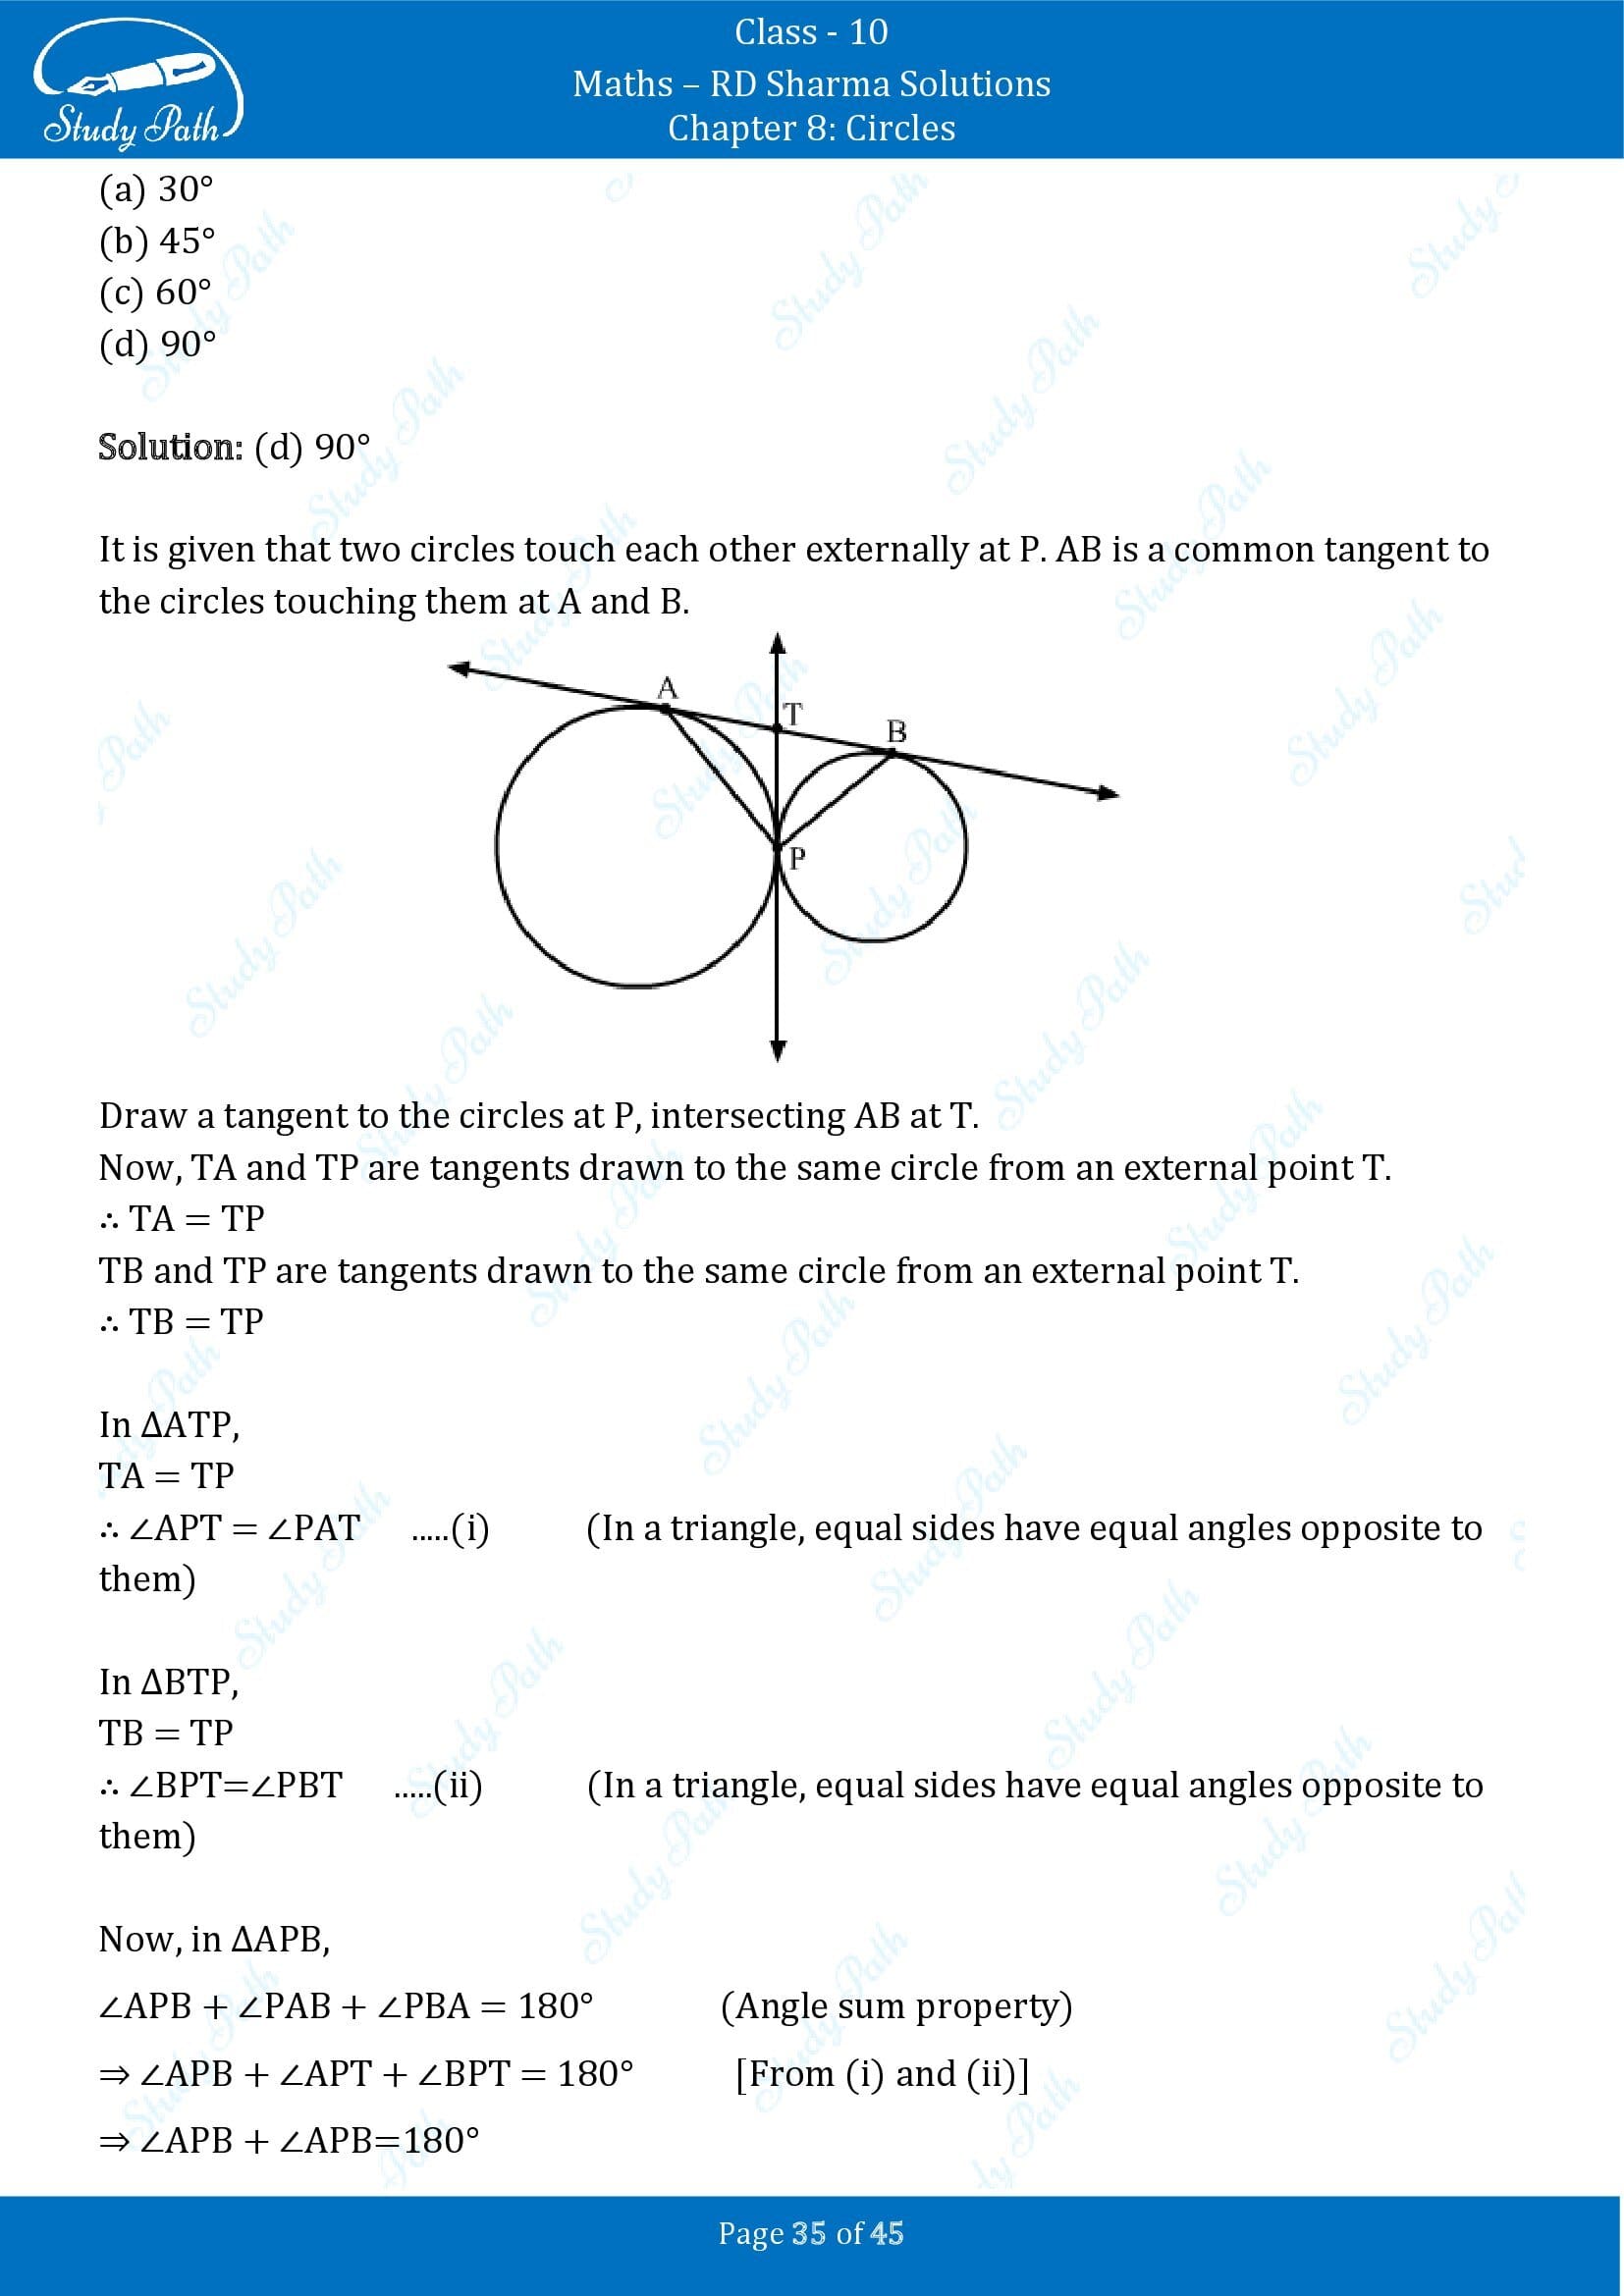 RD Sharma Solutions Class 10 Chapter 8 Circles Multiple Choice Questions MCQs 00035